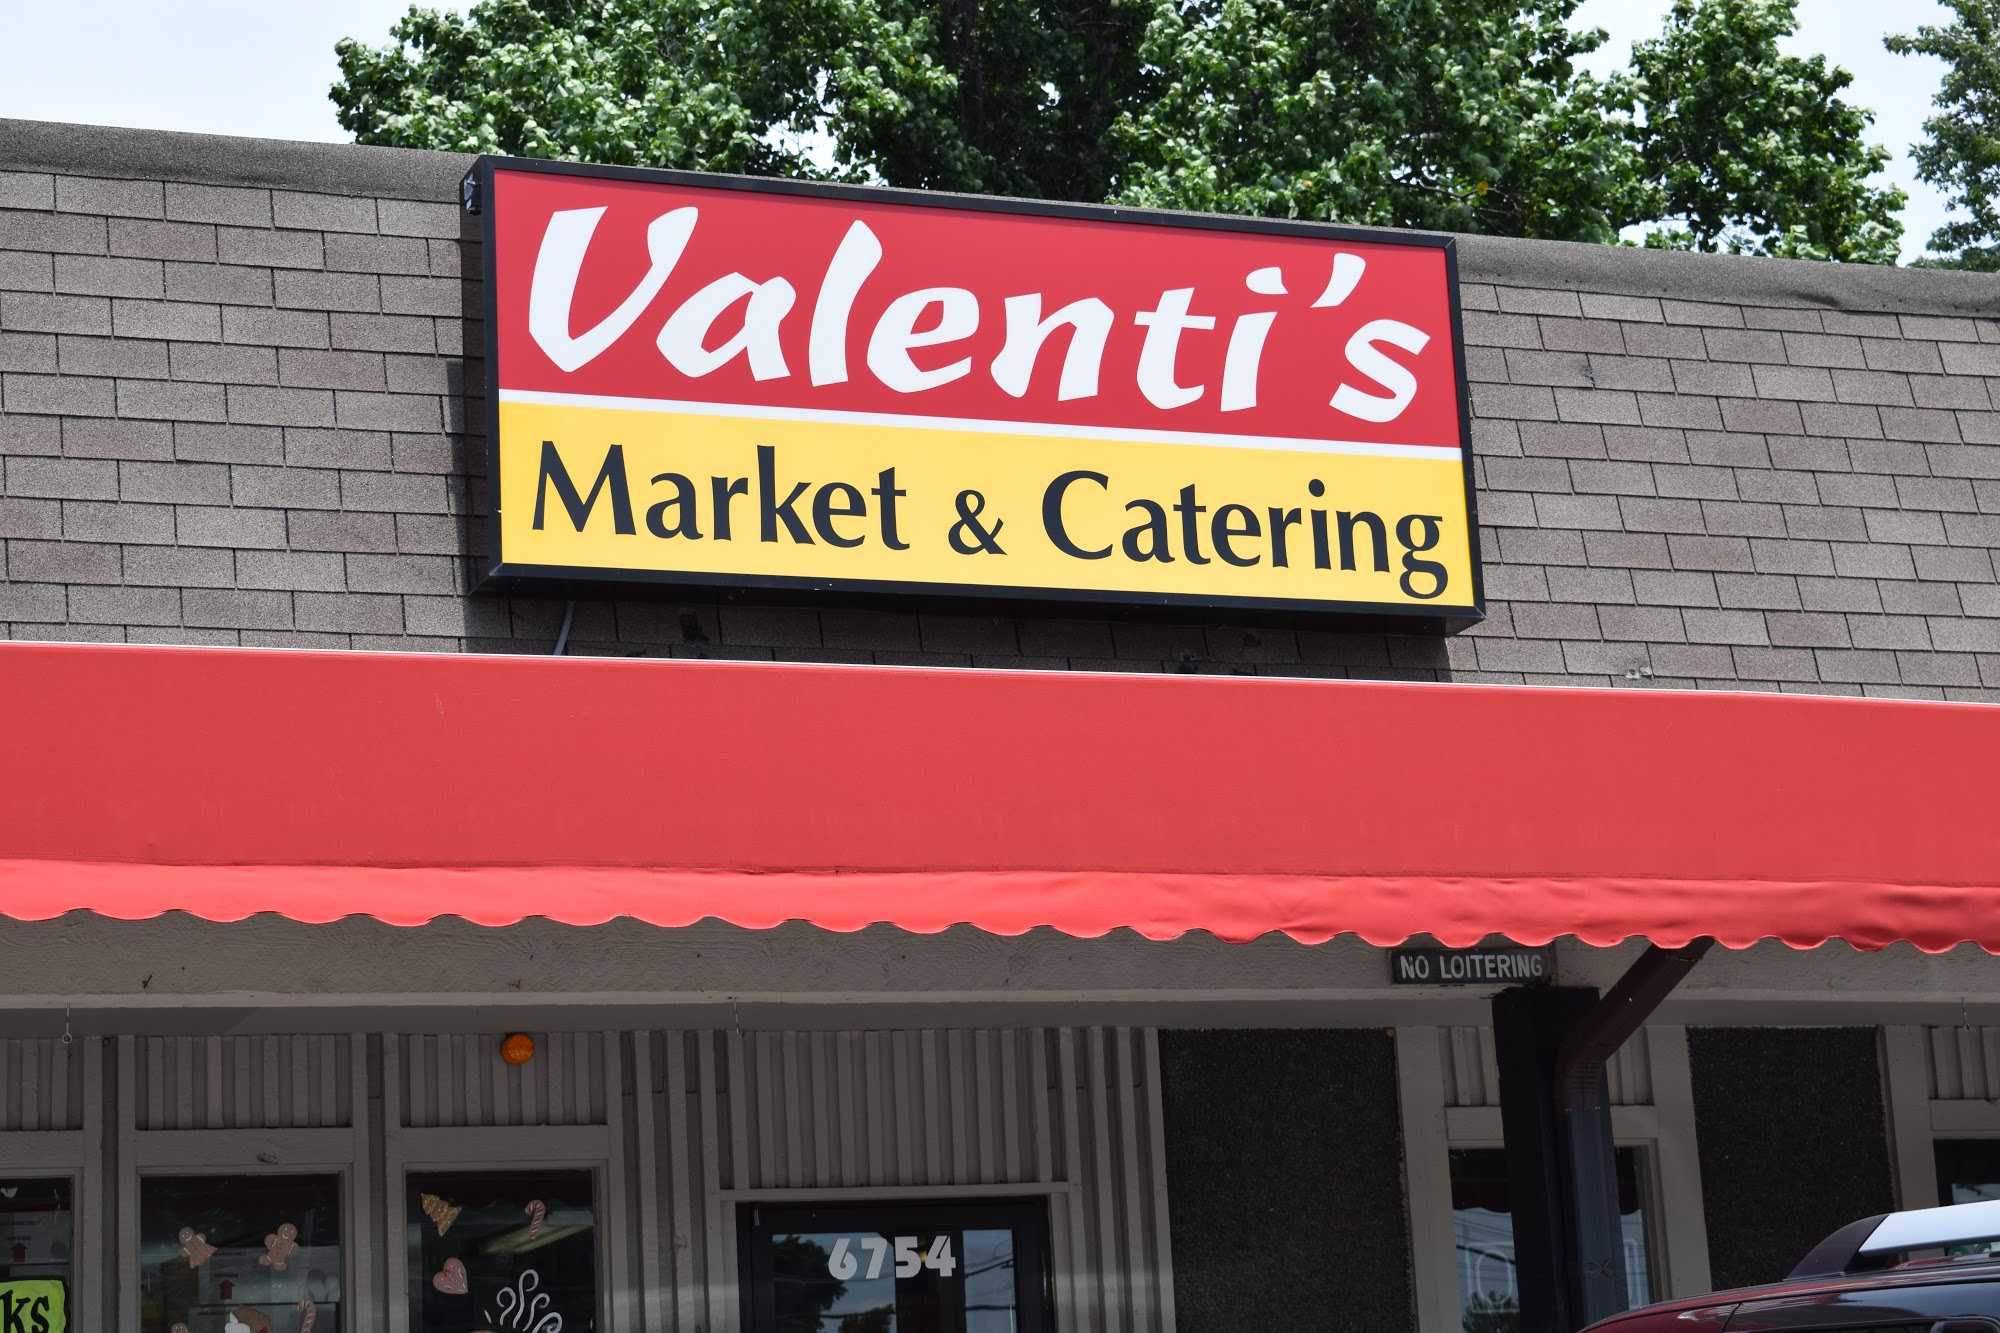 Valenti's Market and Catering